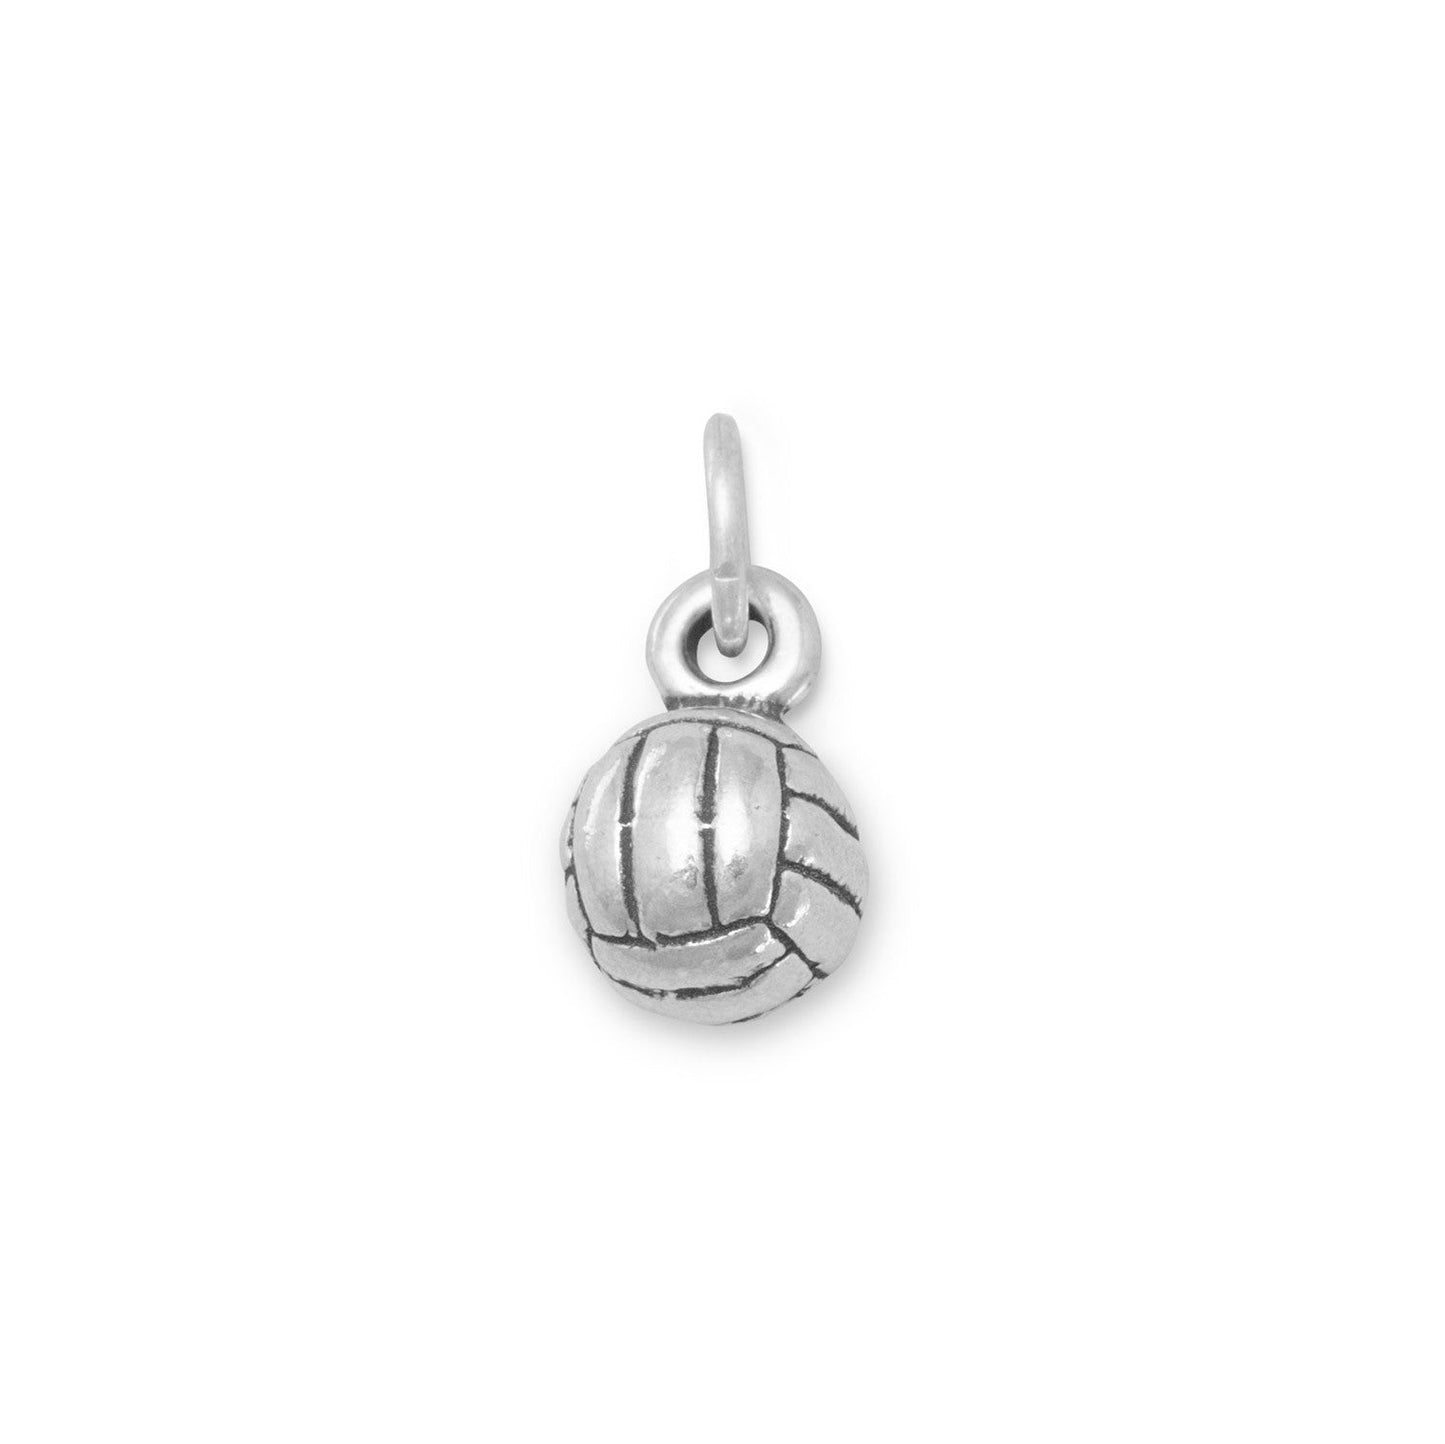 Oxidized Sterling Silver Small Volleyball Charm